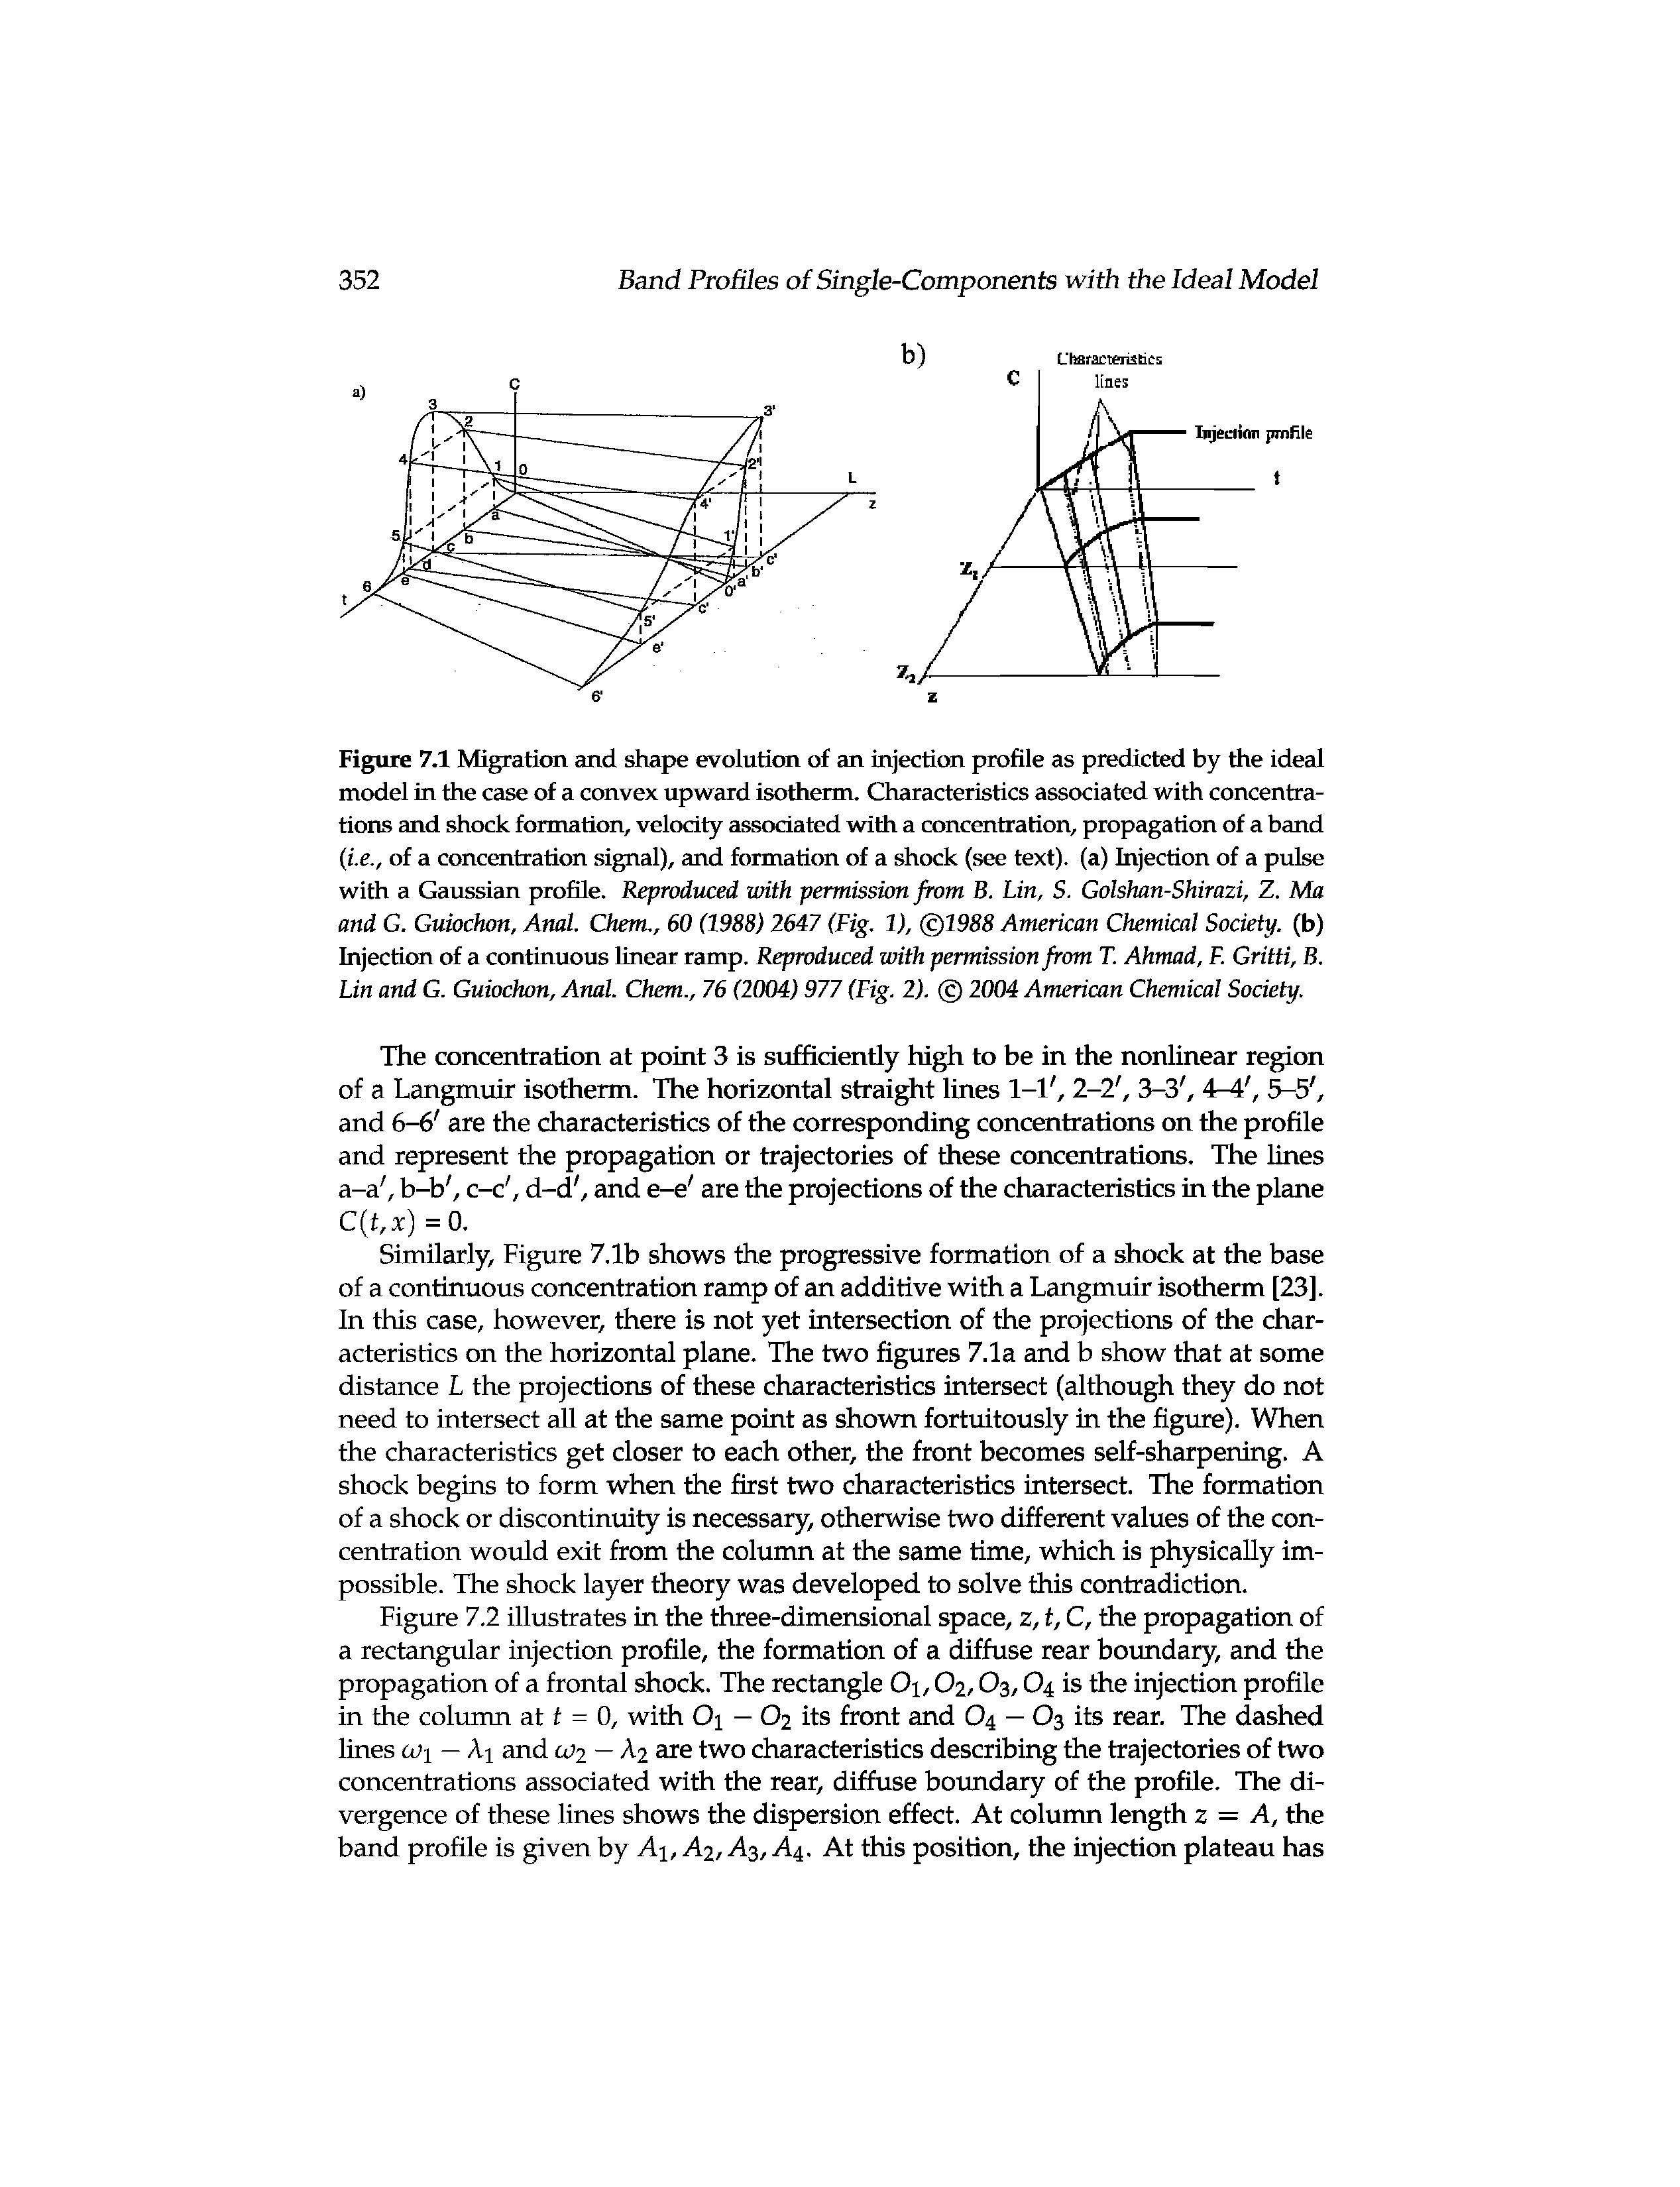 Figure 7.1 Migration and shape evolution of an injection profile as predicted by the ideal model in the case of a convex upward isotherm. Characteristics associated with concentrations and shock formation, velocity associated with a concentration, propagation of a band (i.e., of a concentration signal), and formation of a shock (see text), (a) Injection of a pulse with a Gaussian profile. Reproduced with permission from B. Lin, S. Golshan-Shirazi, Z. Ma and G. Guiochon, Anal. Chem., 60 (1988) 2647 (Fig. 1), 1988 American Chemical Society, (b) Injection of a continuous hnear ramp. Reproduced with permission from T. Ahmad, F. Gritti, B. Lin and G. Guiochon, Anal. Chem., 76 (2004) 977 (Fig. 2). 2004 American Chemical Society.